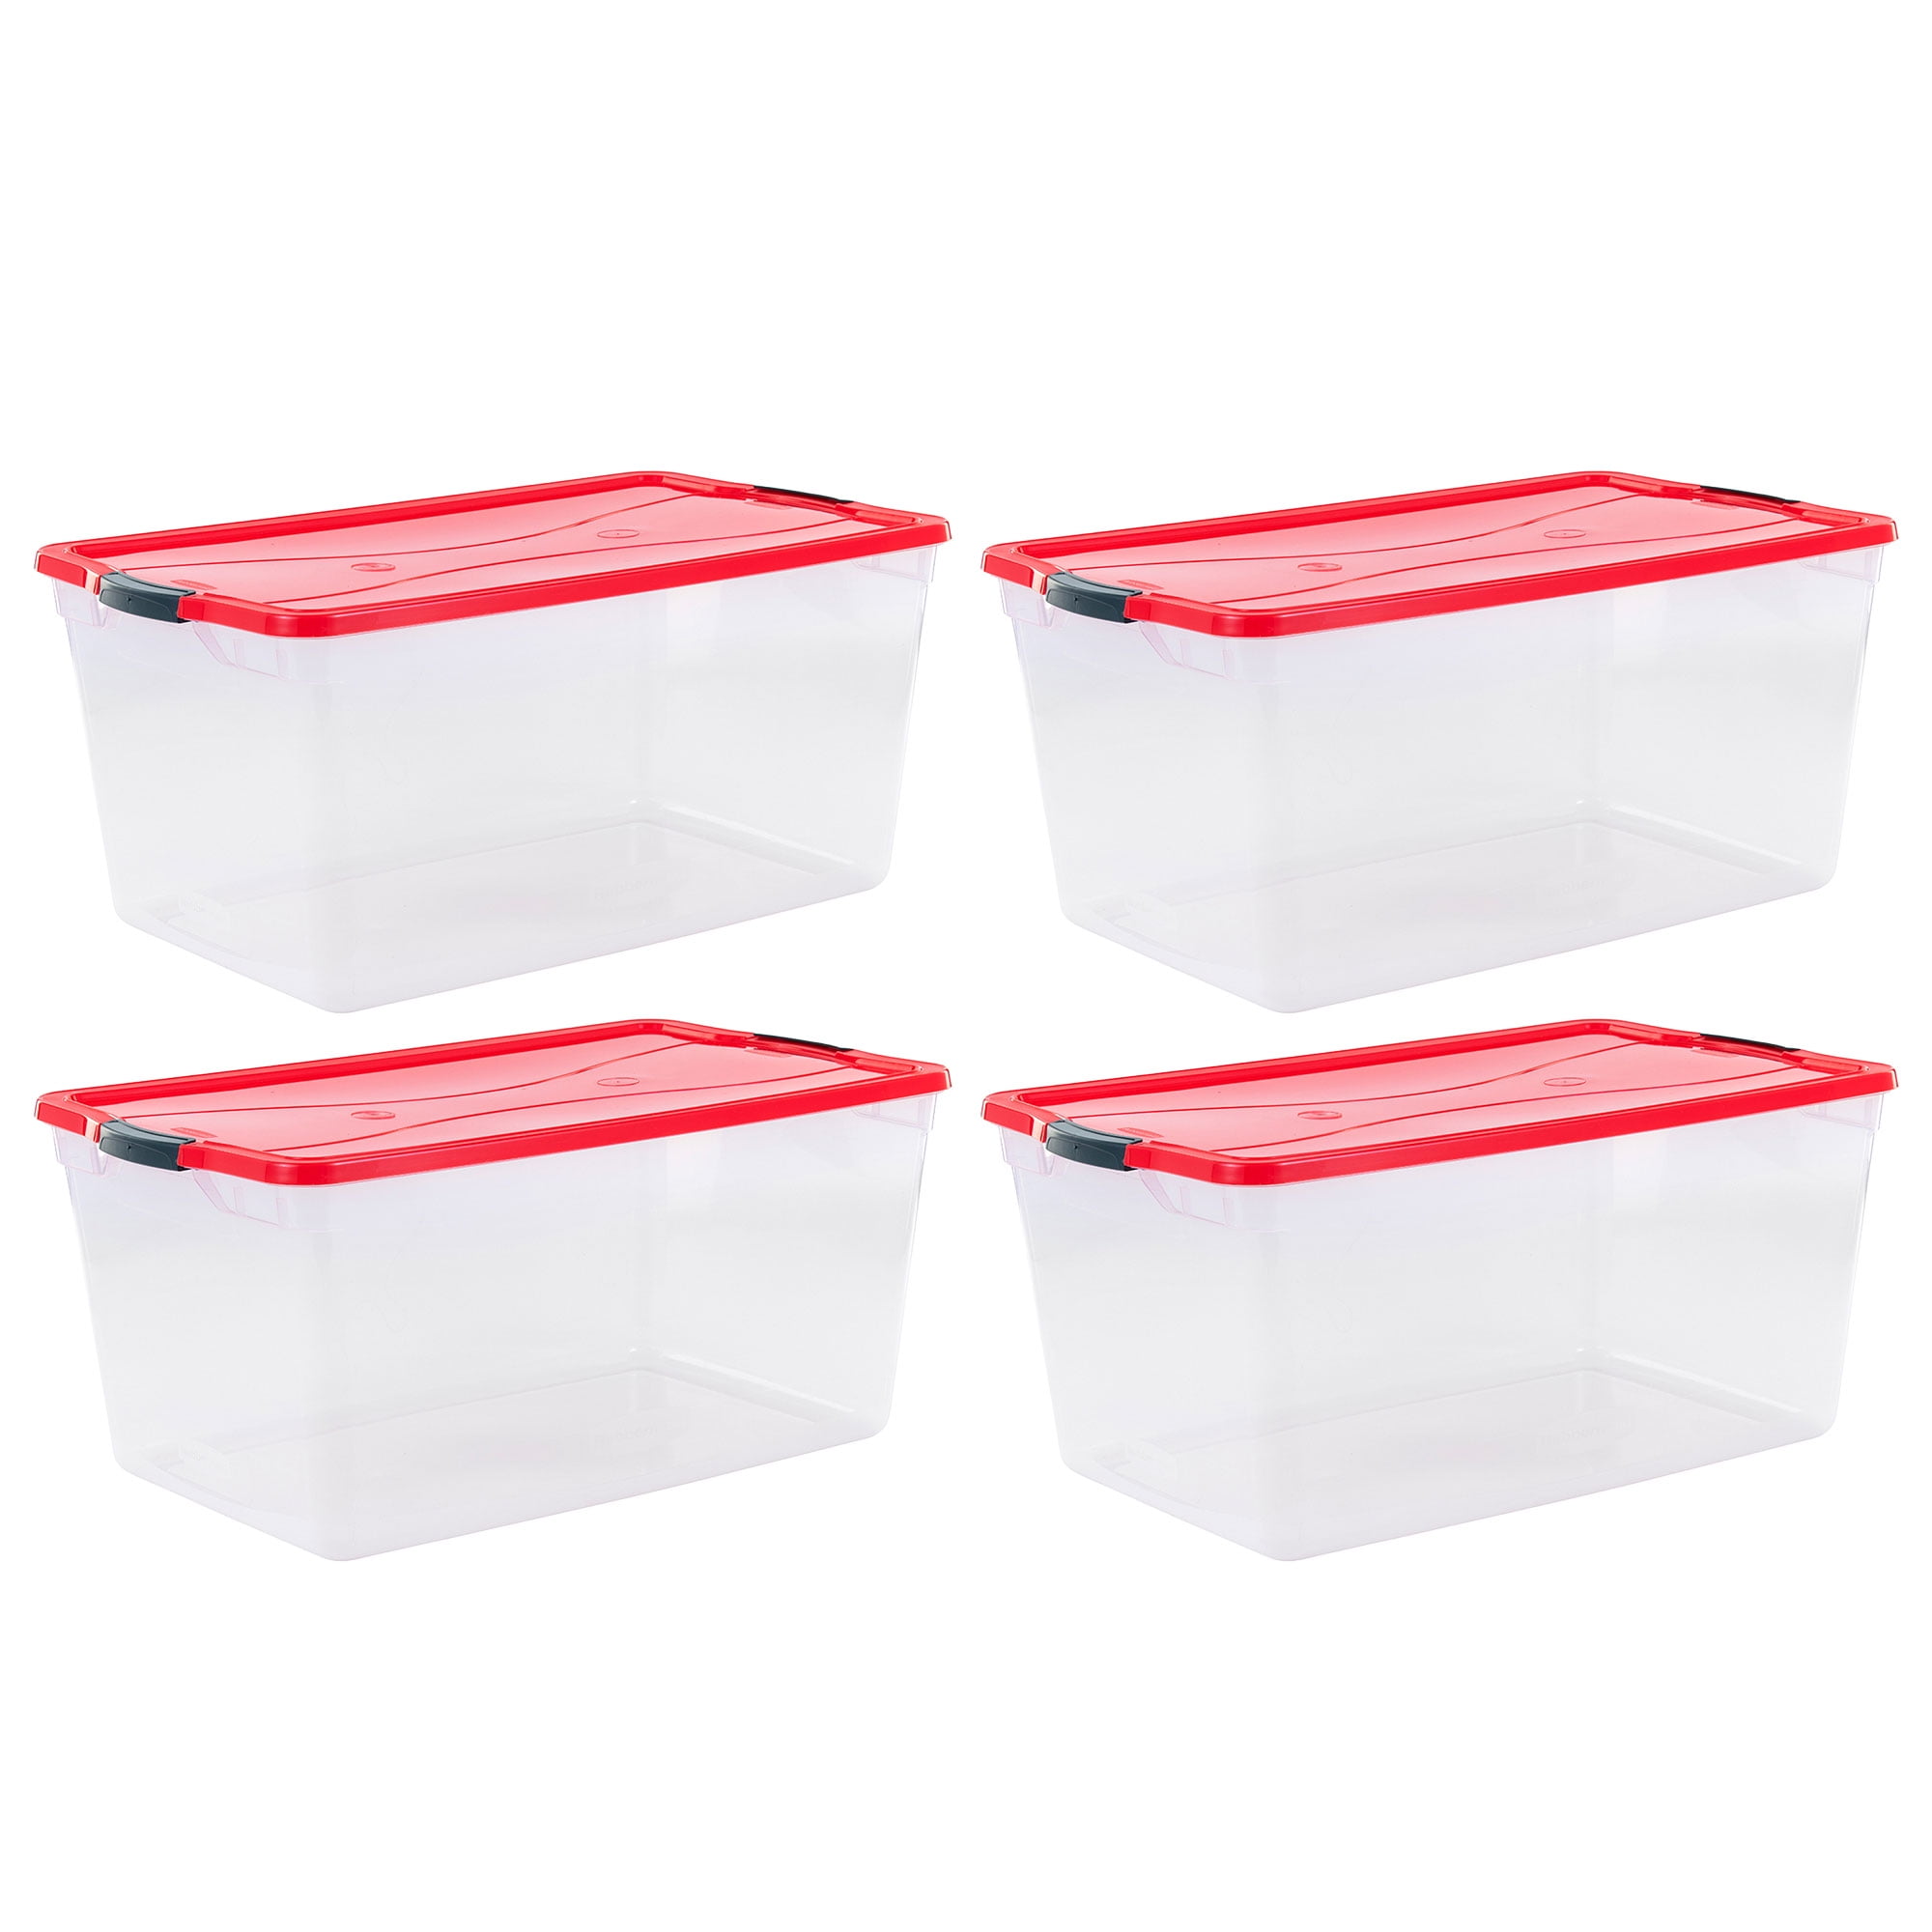 Rubbermaid Cleverstore 18 Gallon Holiday Storage Tote, Clear & Red (4 Pack)